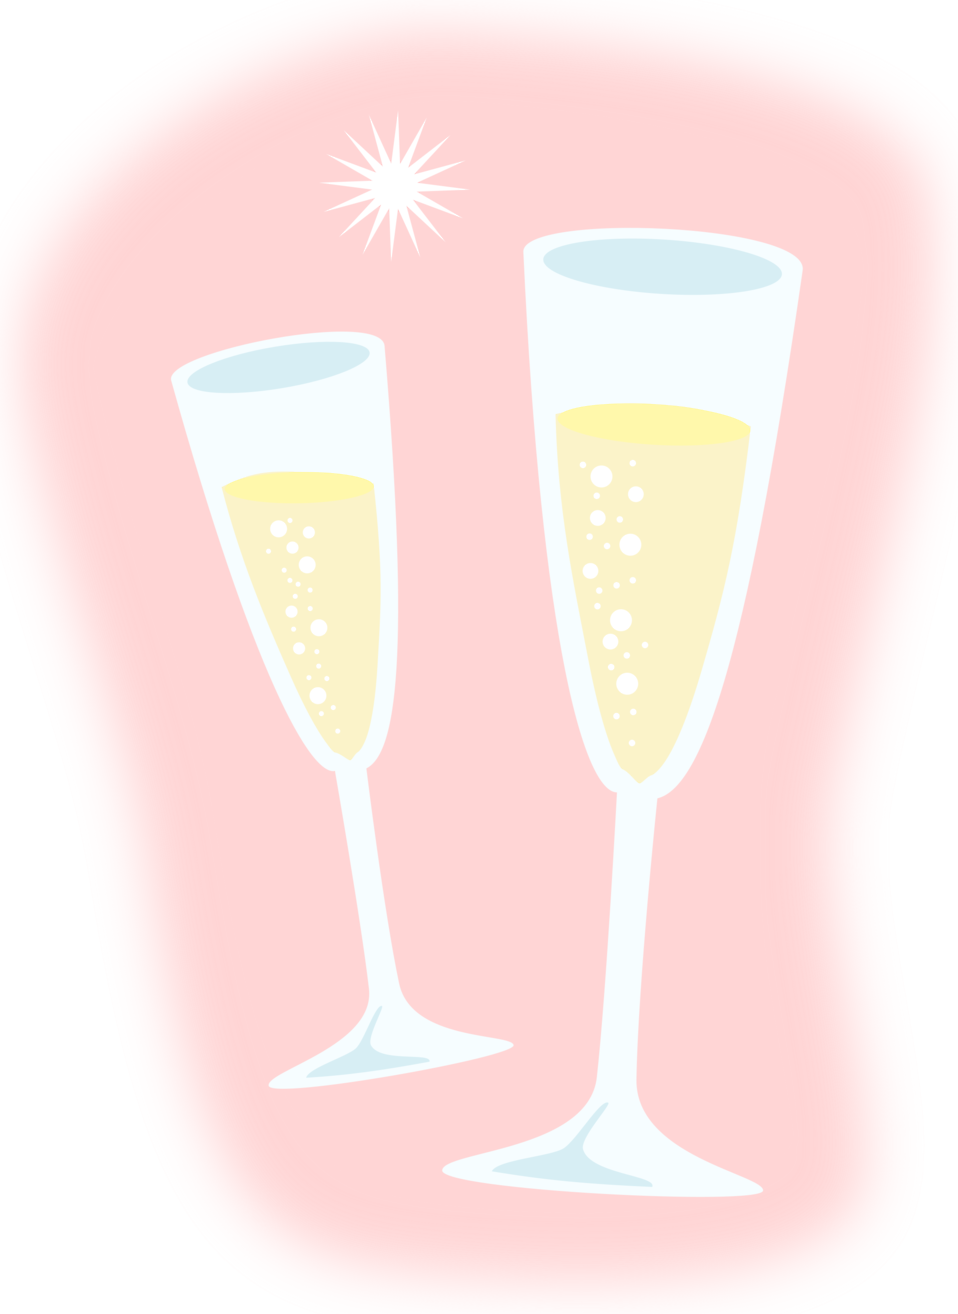 Champagne | Free Stock Photo | Illustration of champagne ...